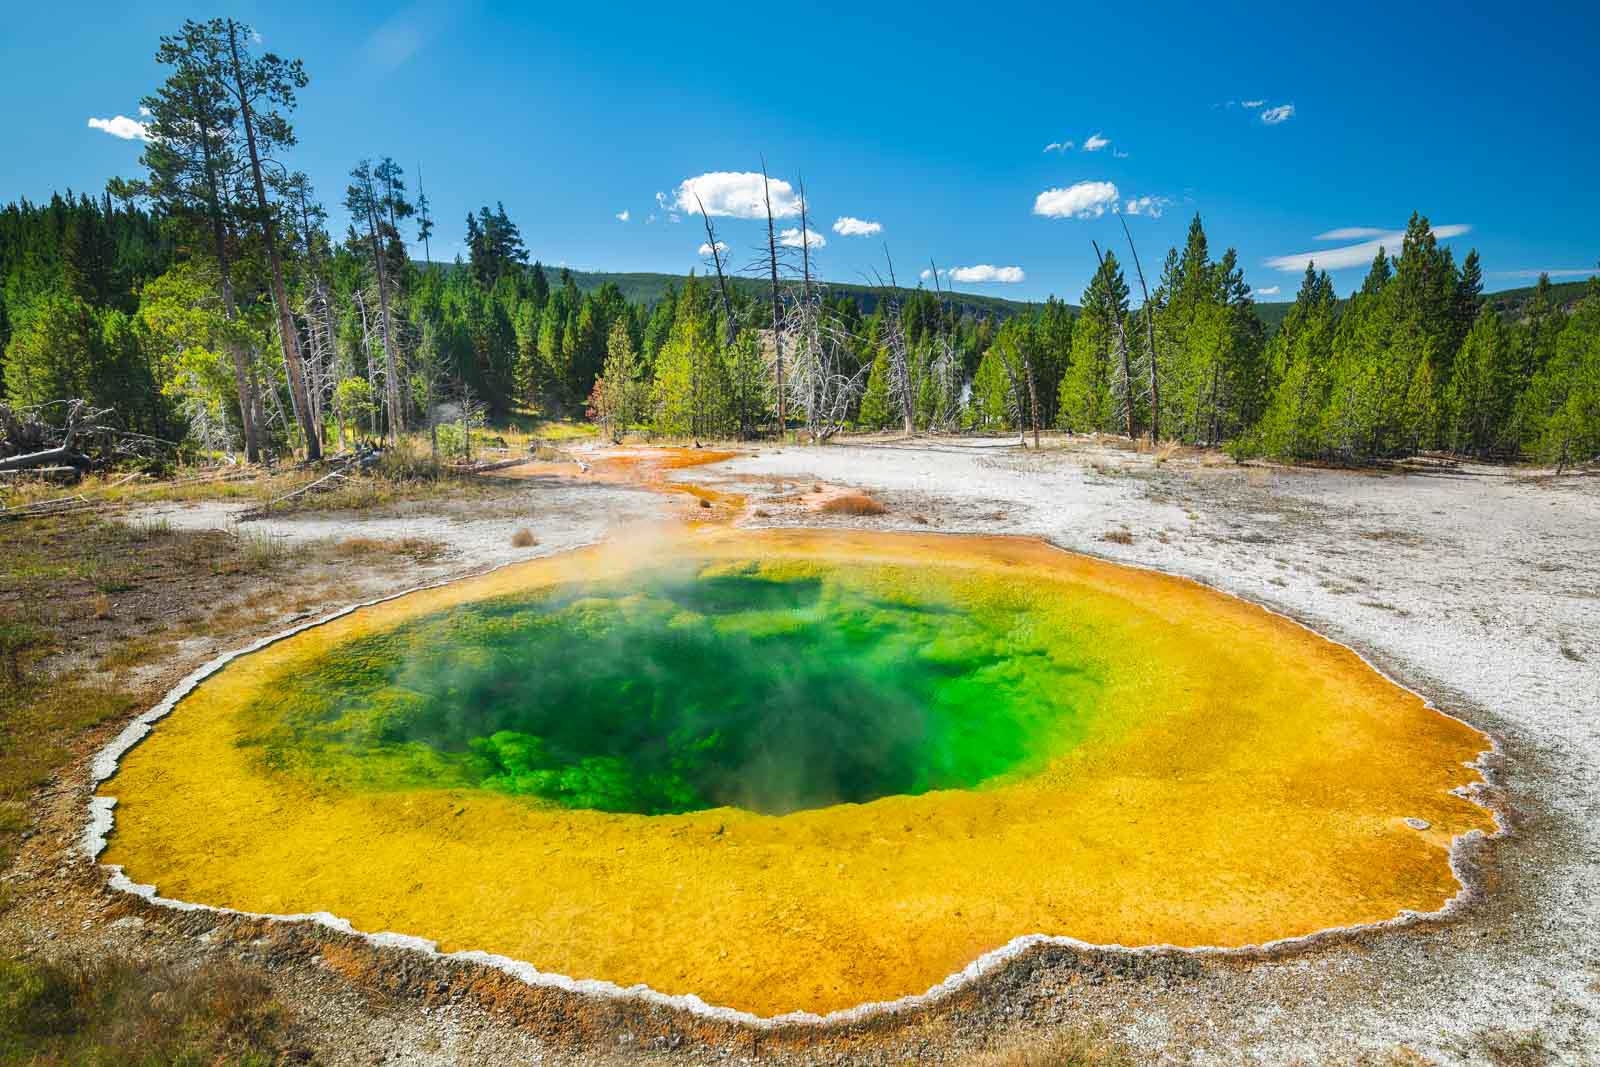 where to stay in yellowstone national park accommodations